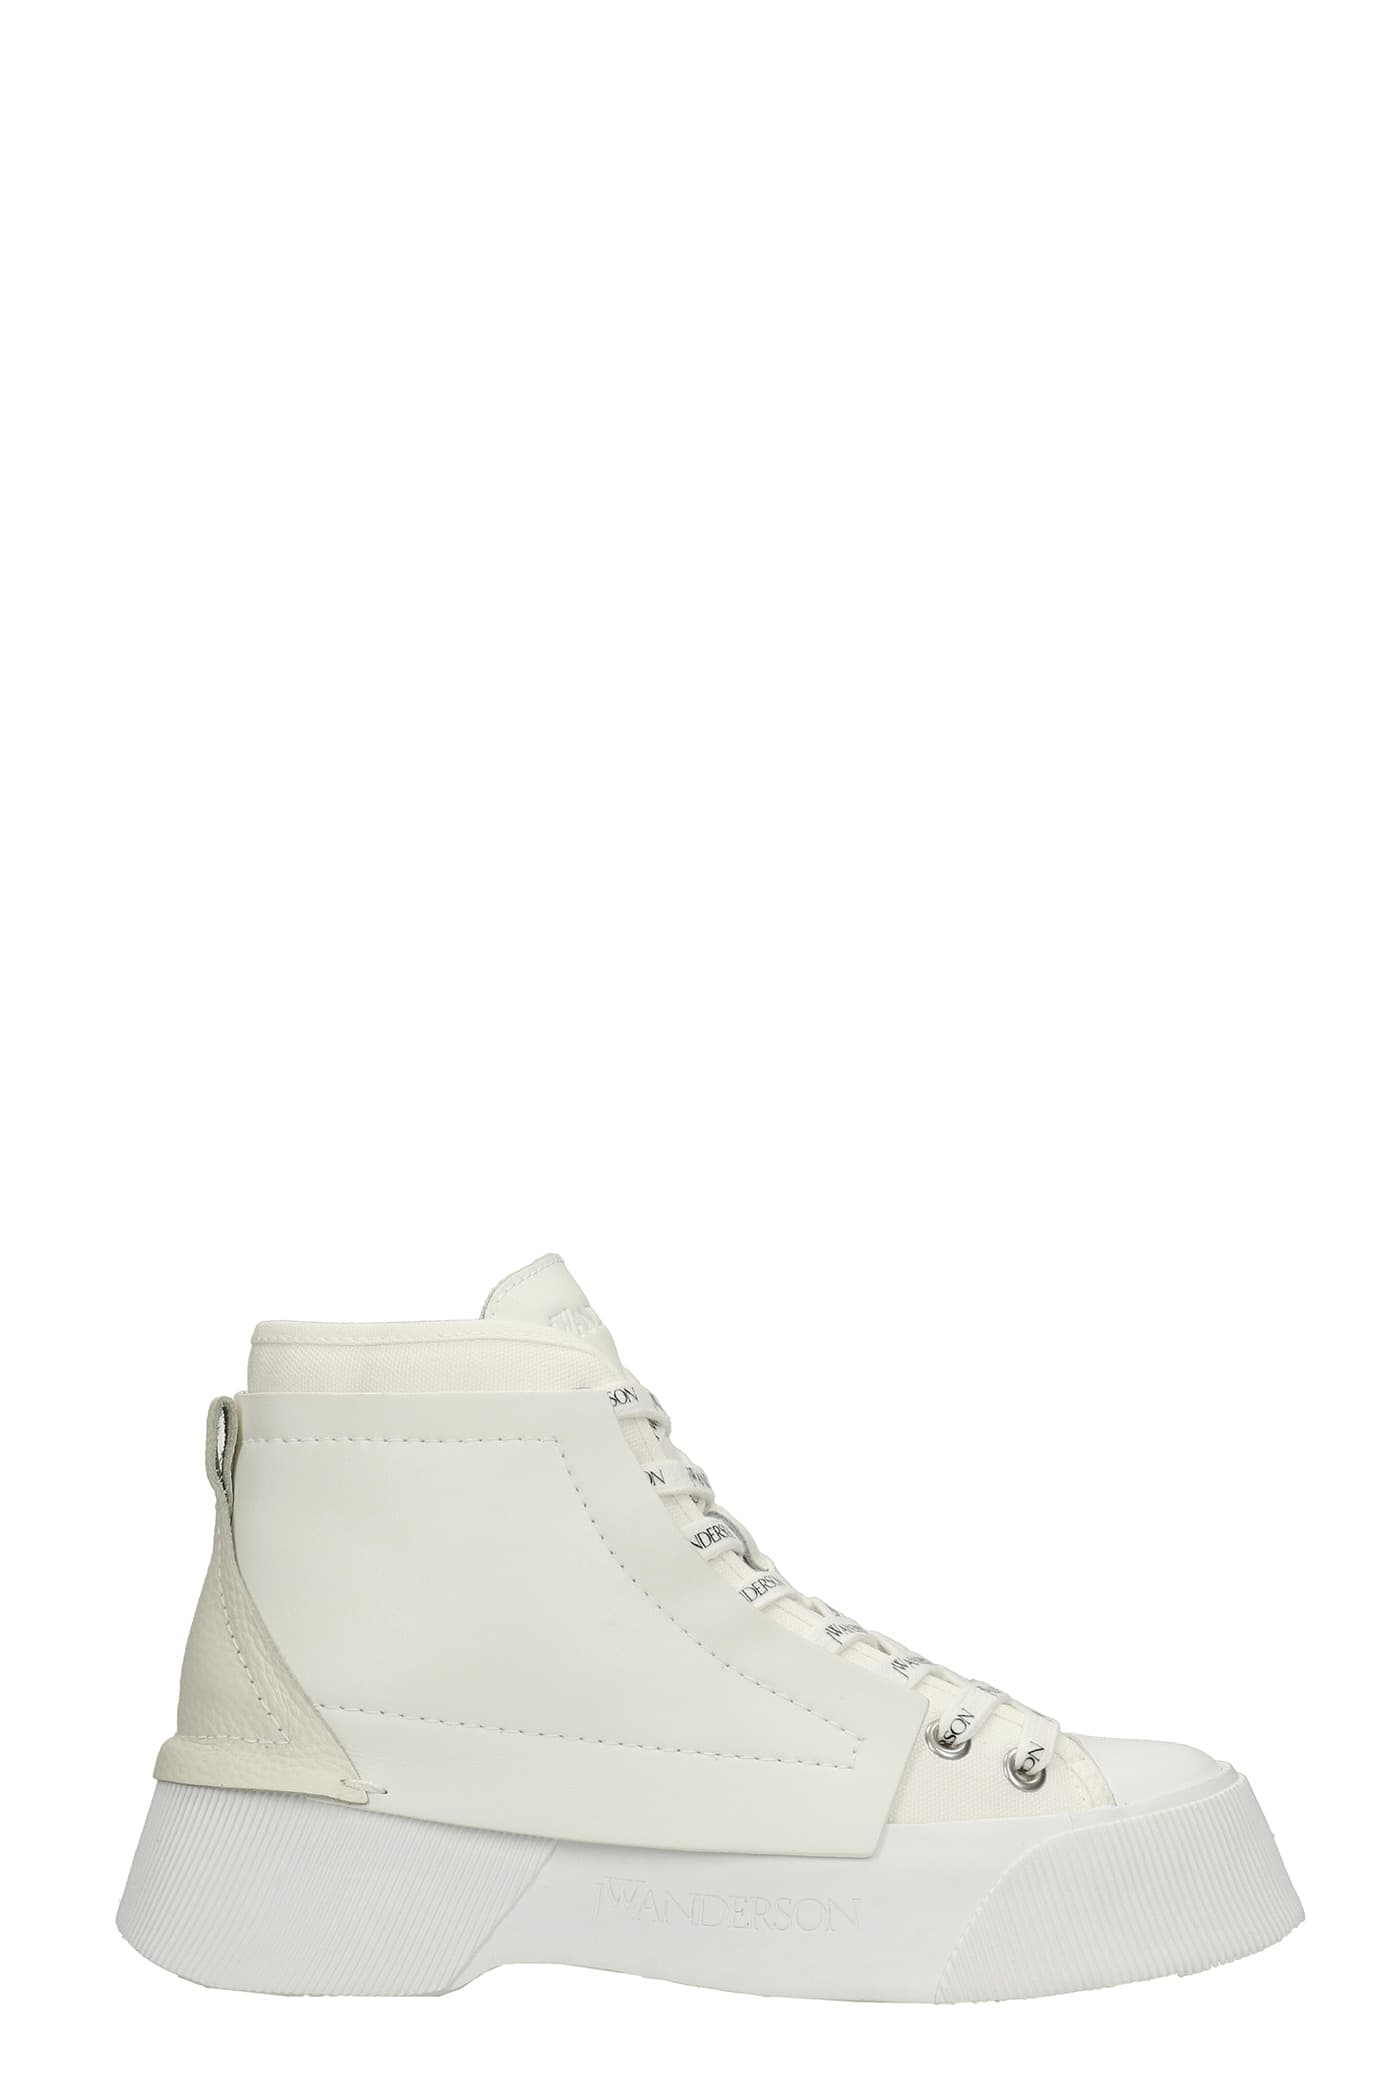 J.W. Anderson Sneakers In White Leather